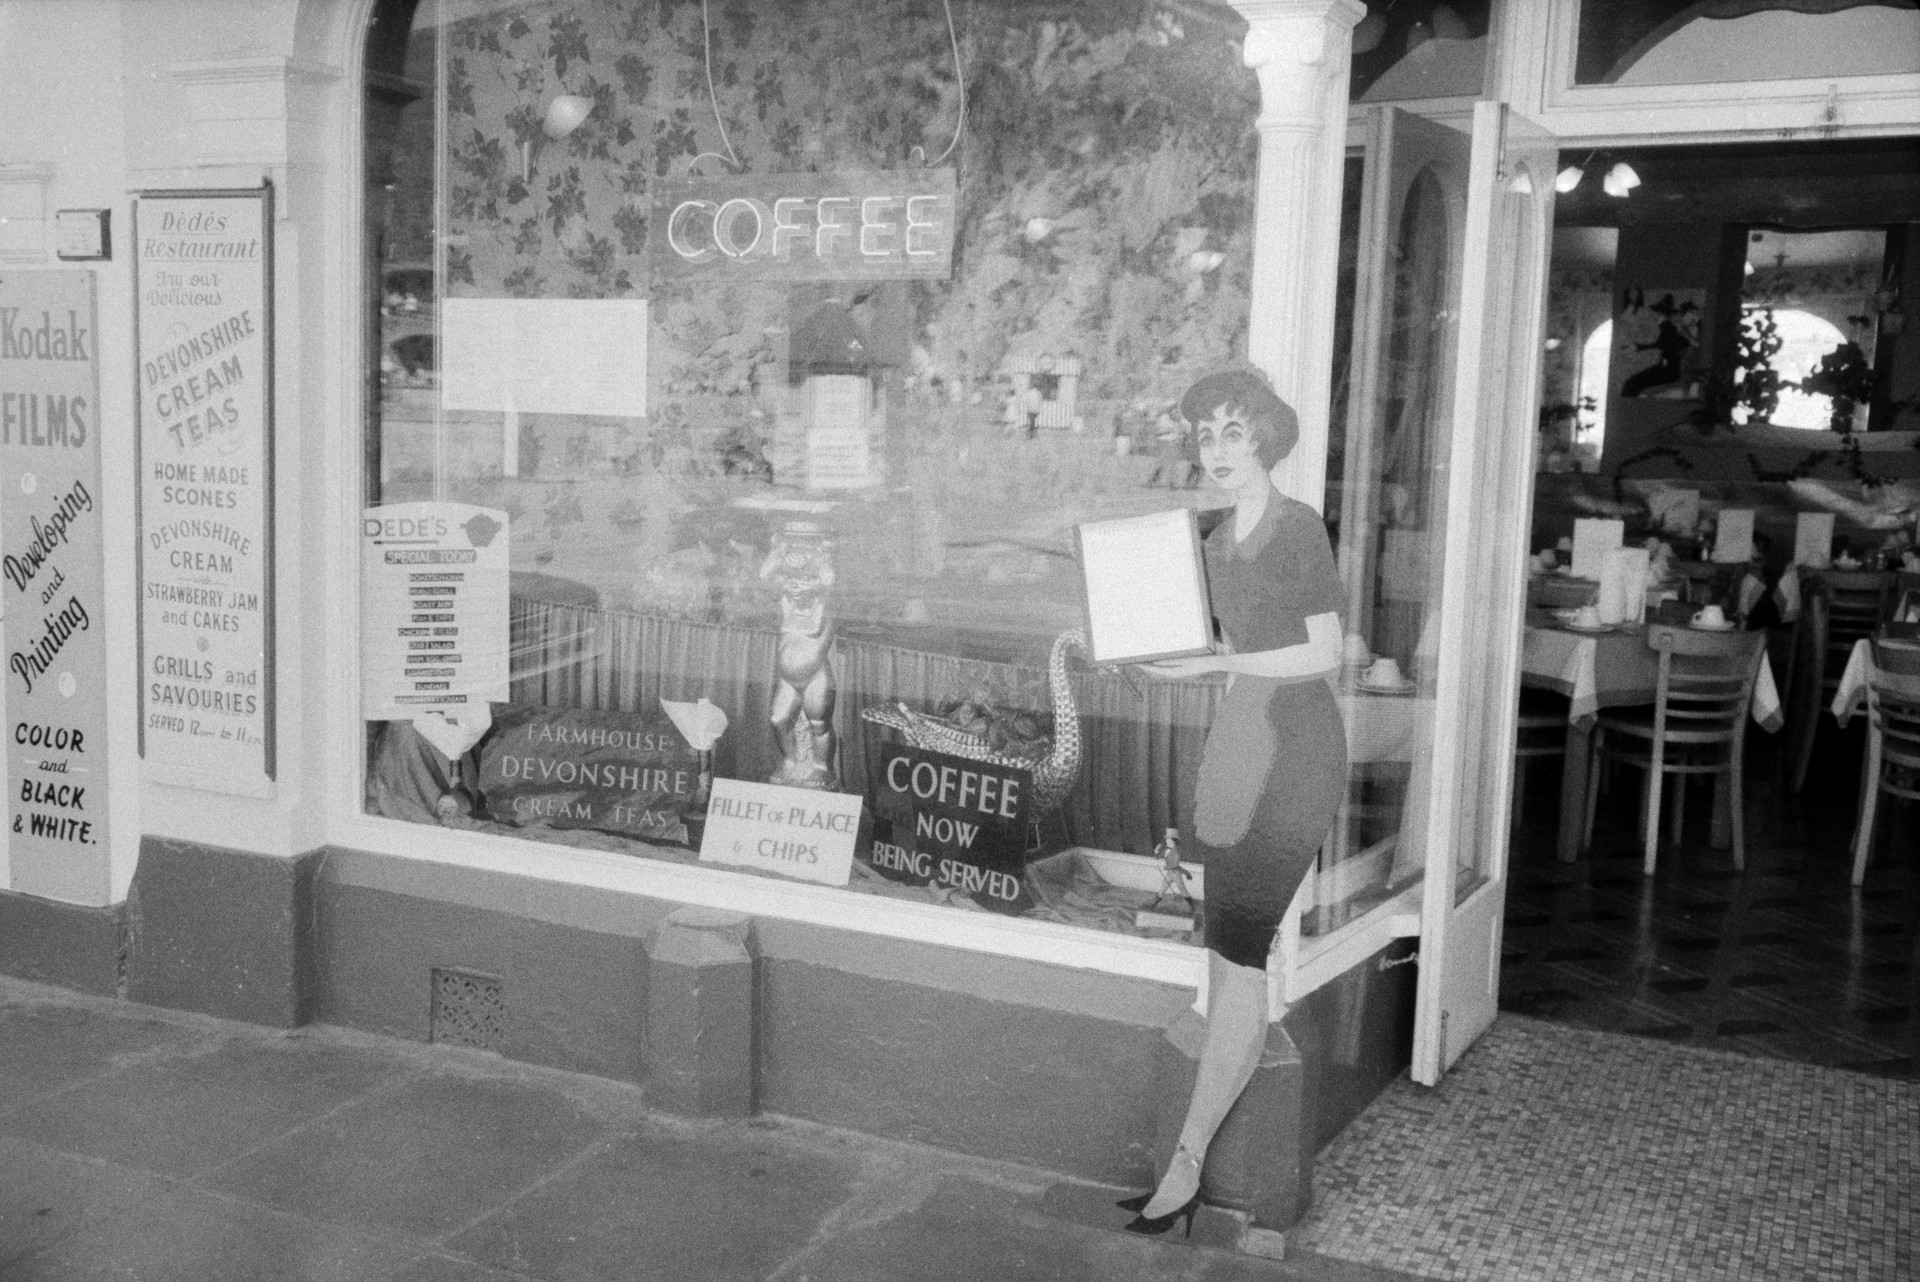 A café window and entrance at Ilfracombe. Adverts for coffee, fish and chips and cream teas are in the window.